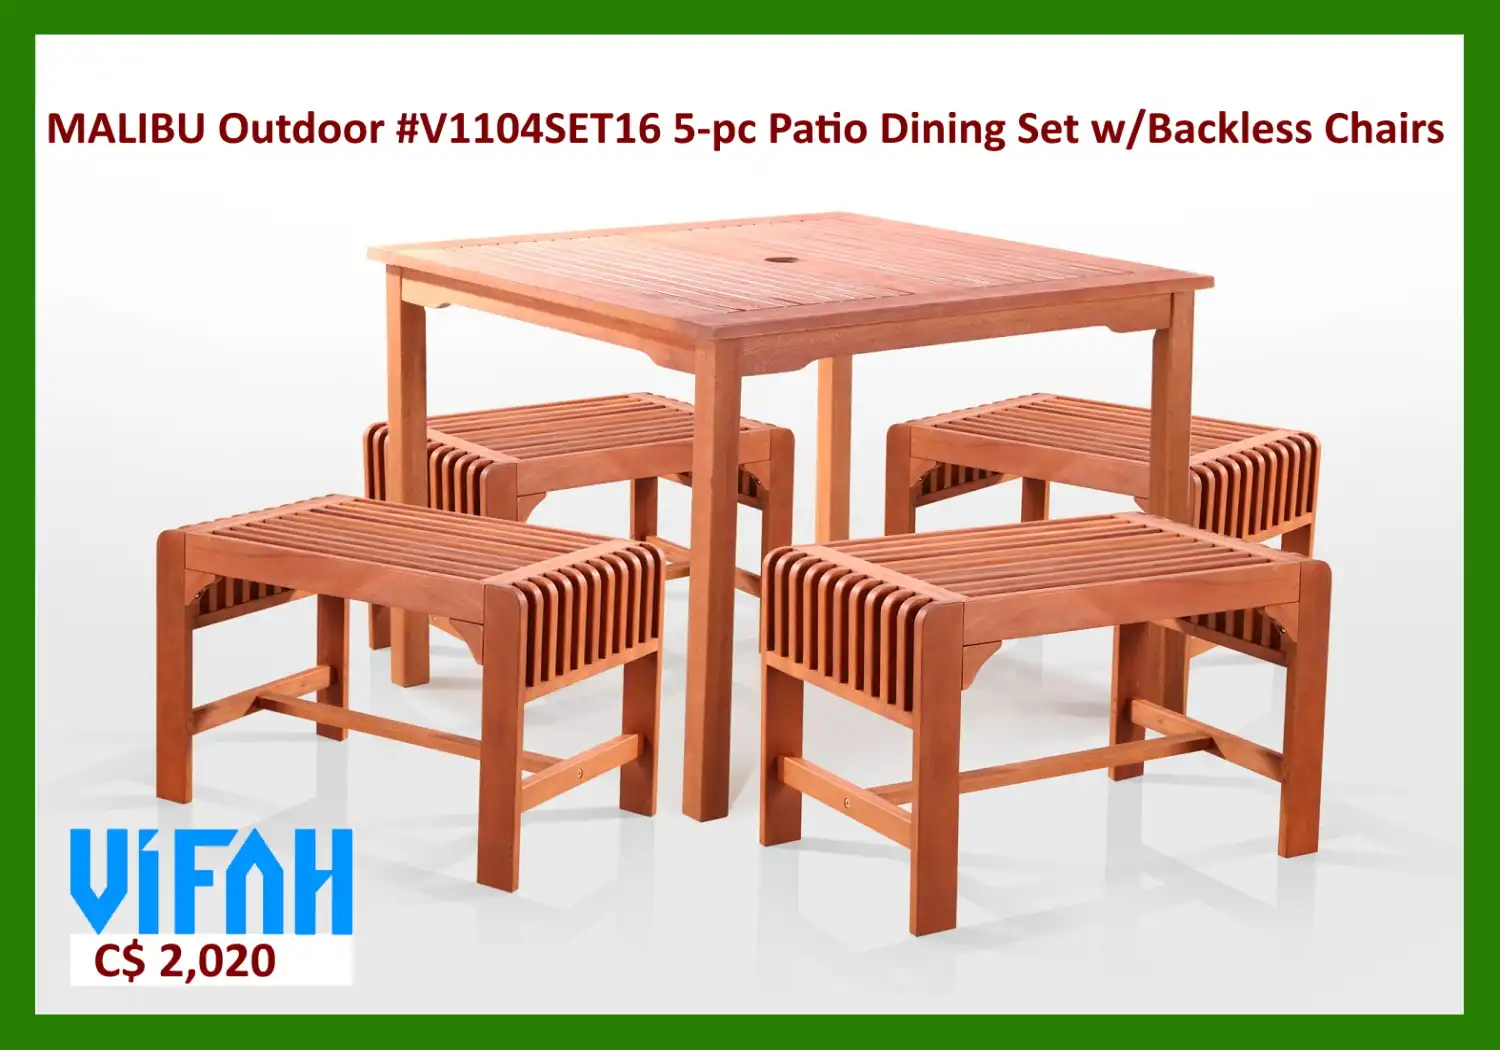 MALIBU Outdoor #V1104SET16 5-piece Wood Patio Dining Set with Backless Chairs